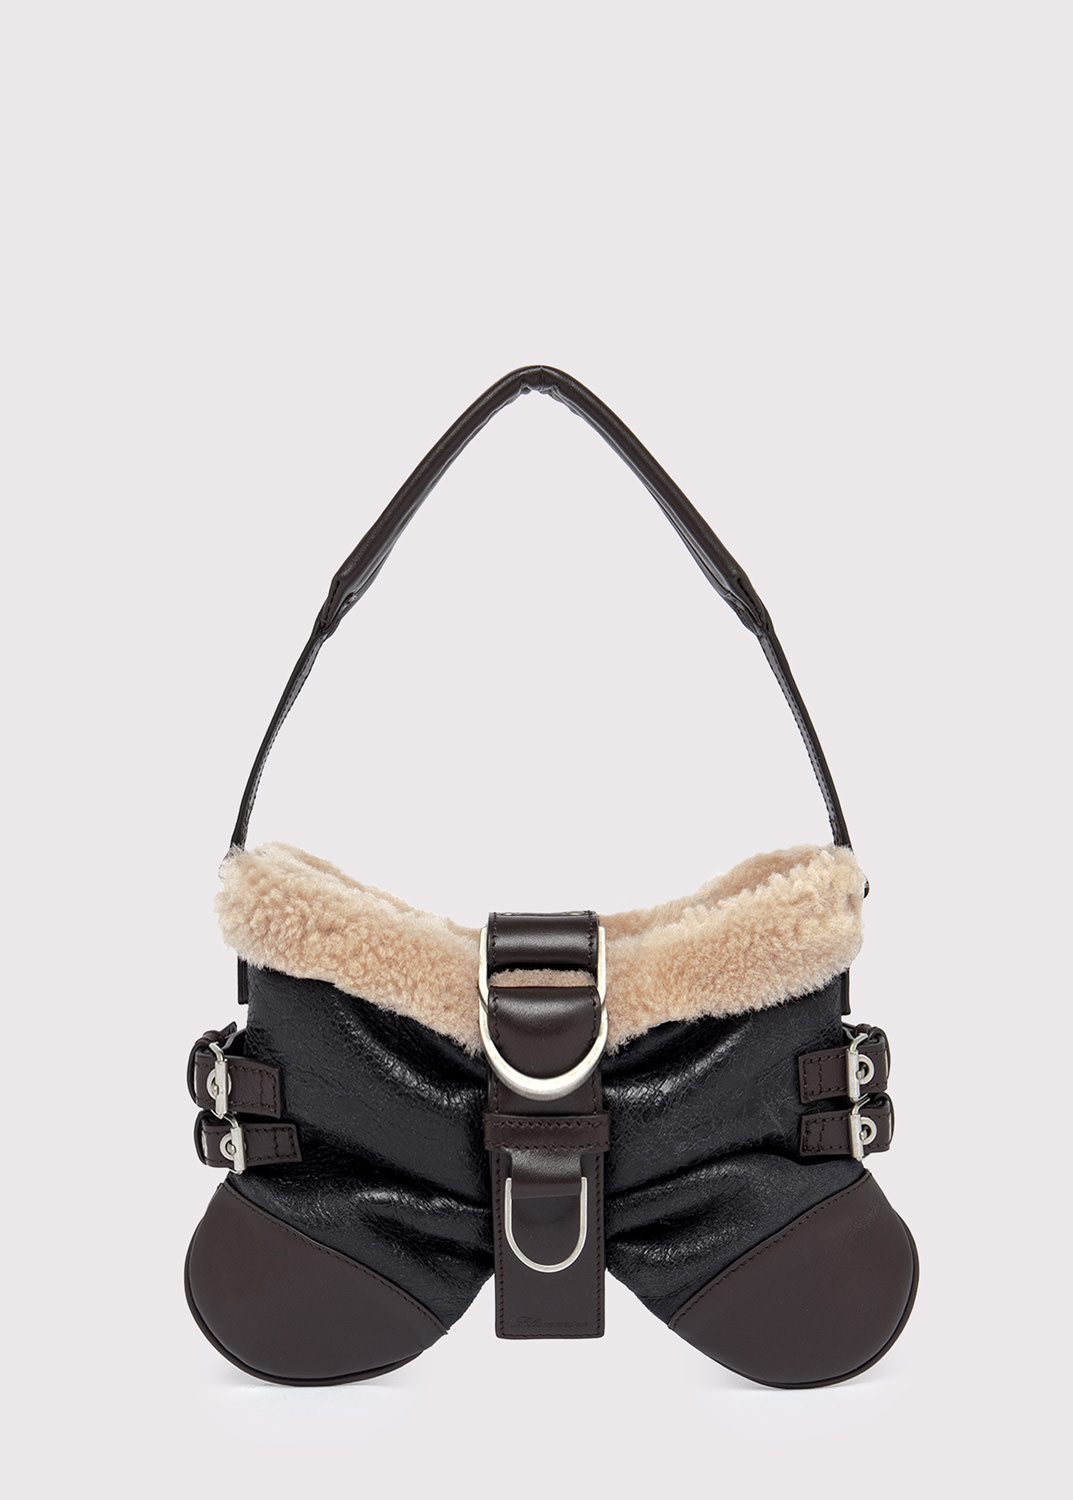 BLUMARINE: BUTTERFLY BAG SMALL IN SHEARLING 